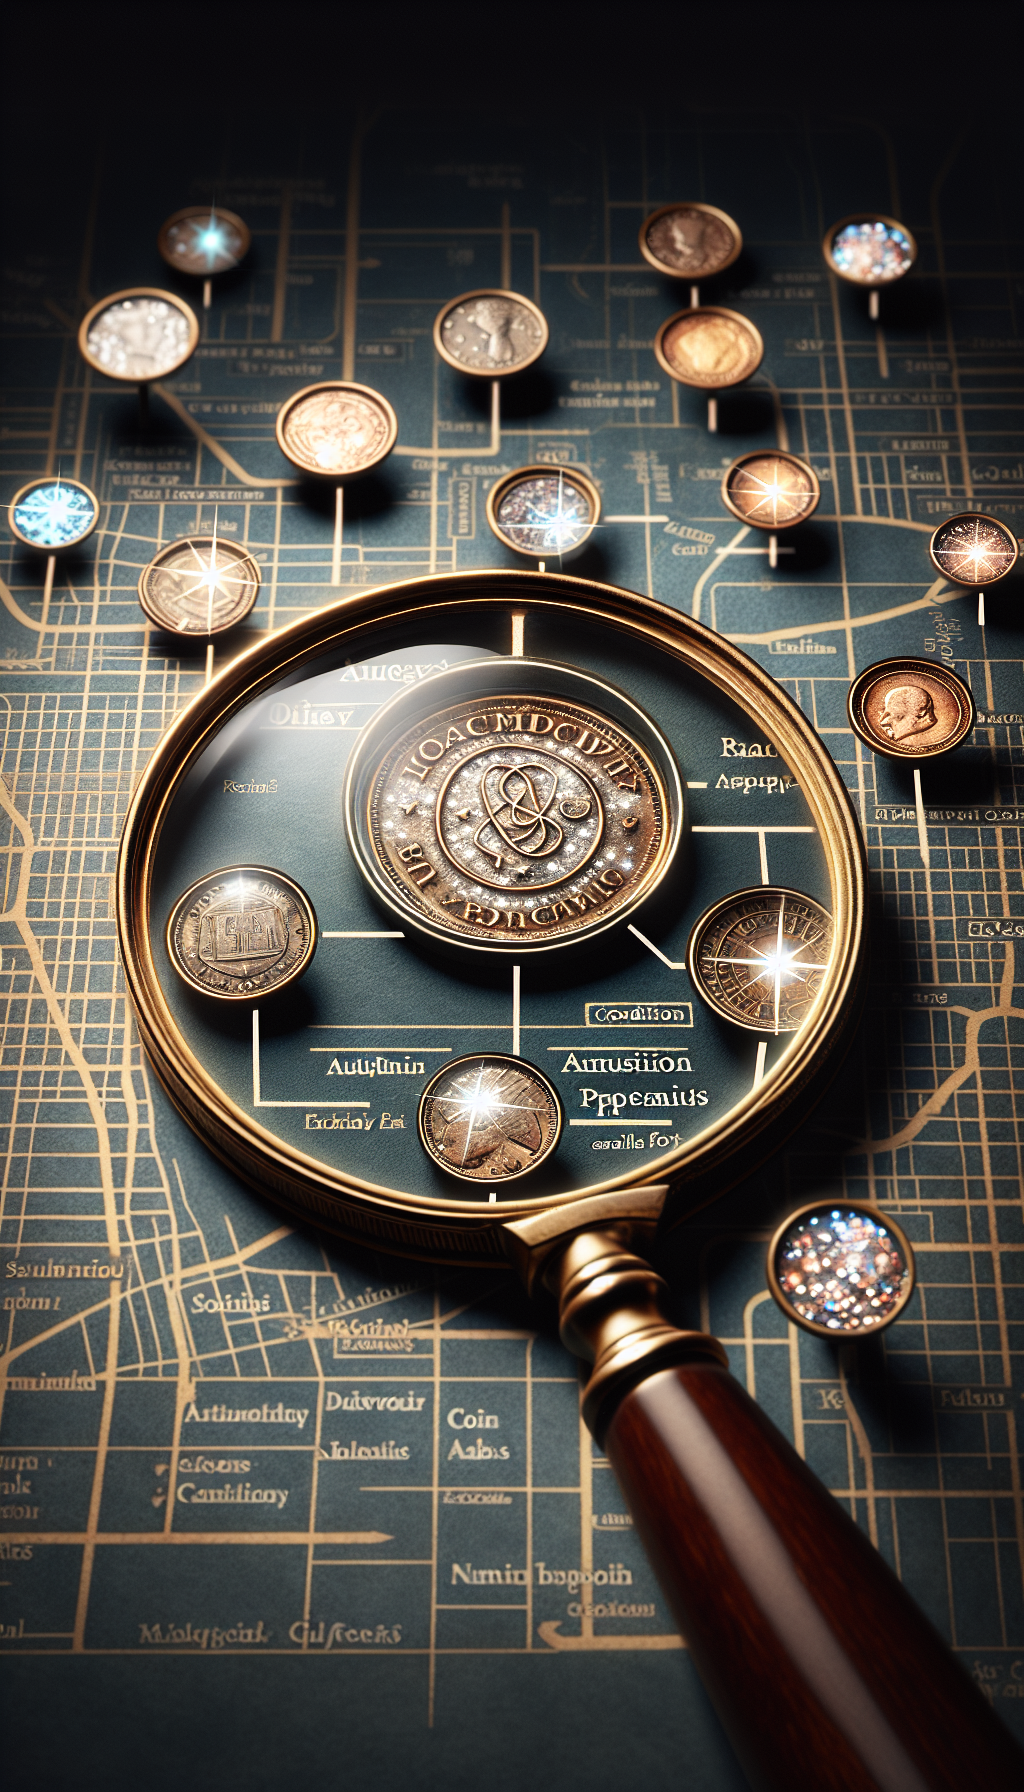 An exquisite magnifying glass zooms in on a map, spotlighting a cluster of glimmering, rare coins with location markers, each marker labeled with different appraisal service attributes like "Authenticity," "Condition," and "Rarity." These markers are connected by winding paths that evoke the careful journey through the local numismatic landscape, highlighting the search for appraisal experts within arm's reach.